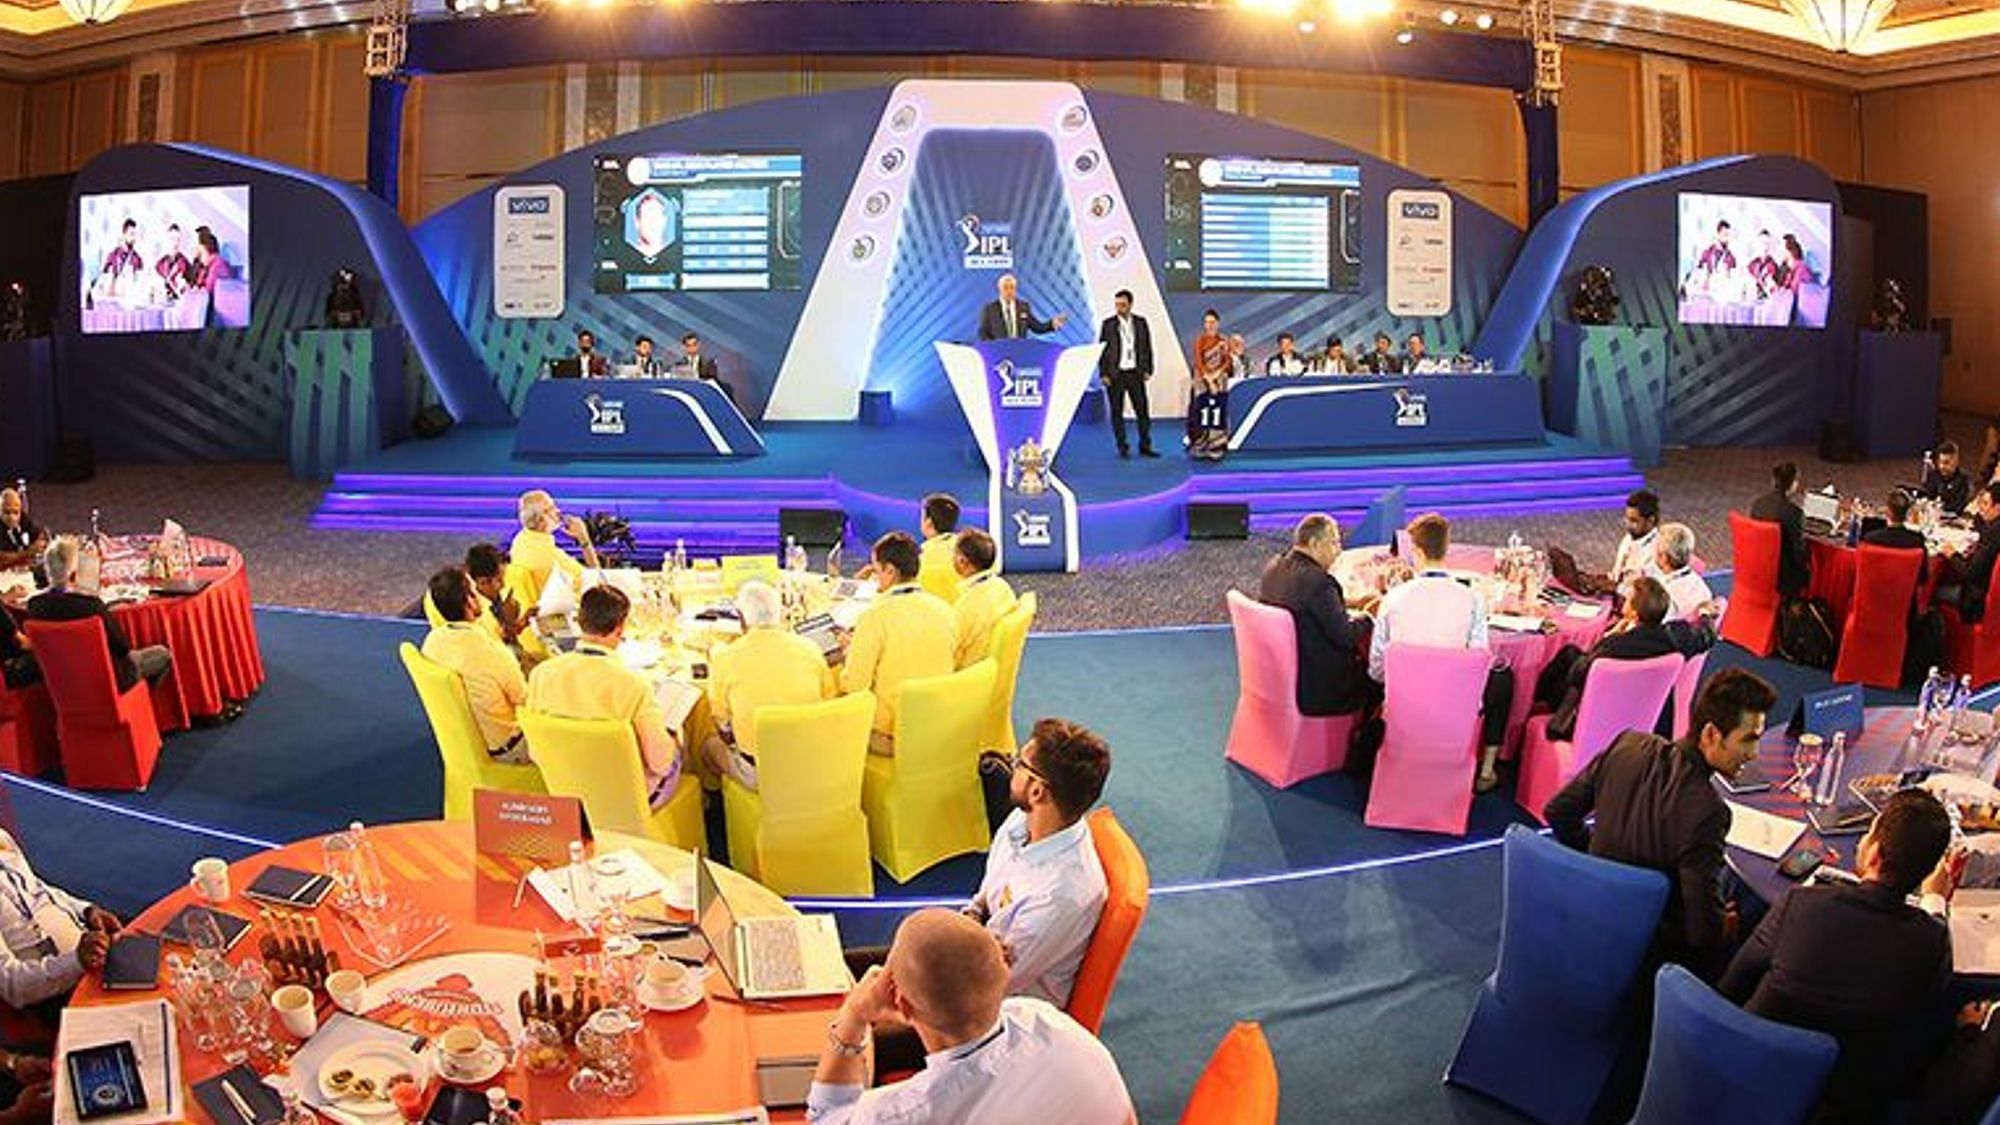 IPL Auction 2021 LIVE Streaming:&nbsp;The 2021 IPL Player Auction will take place on February 18 in Chennai.